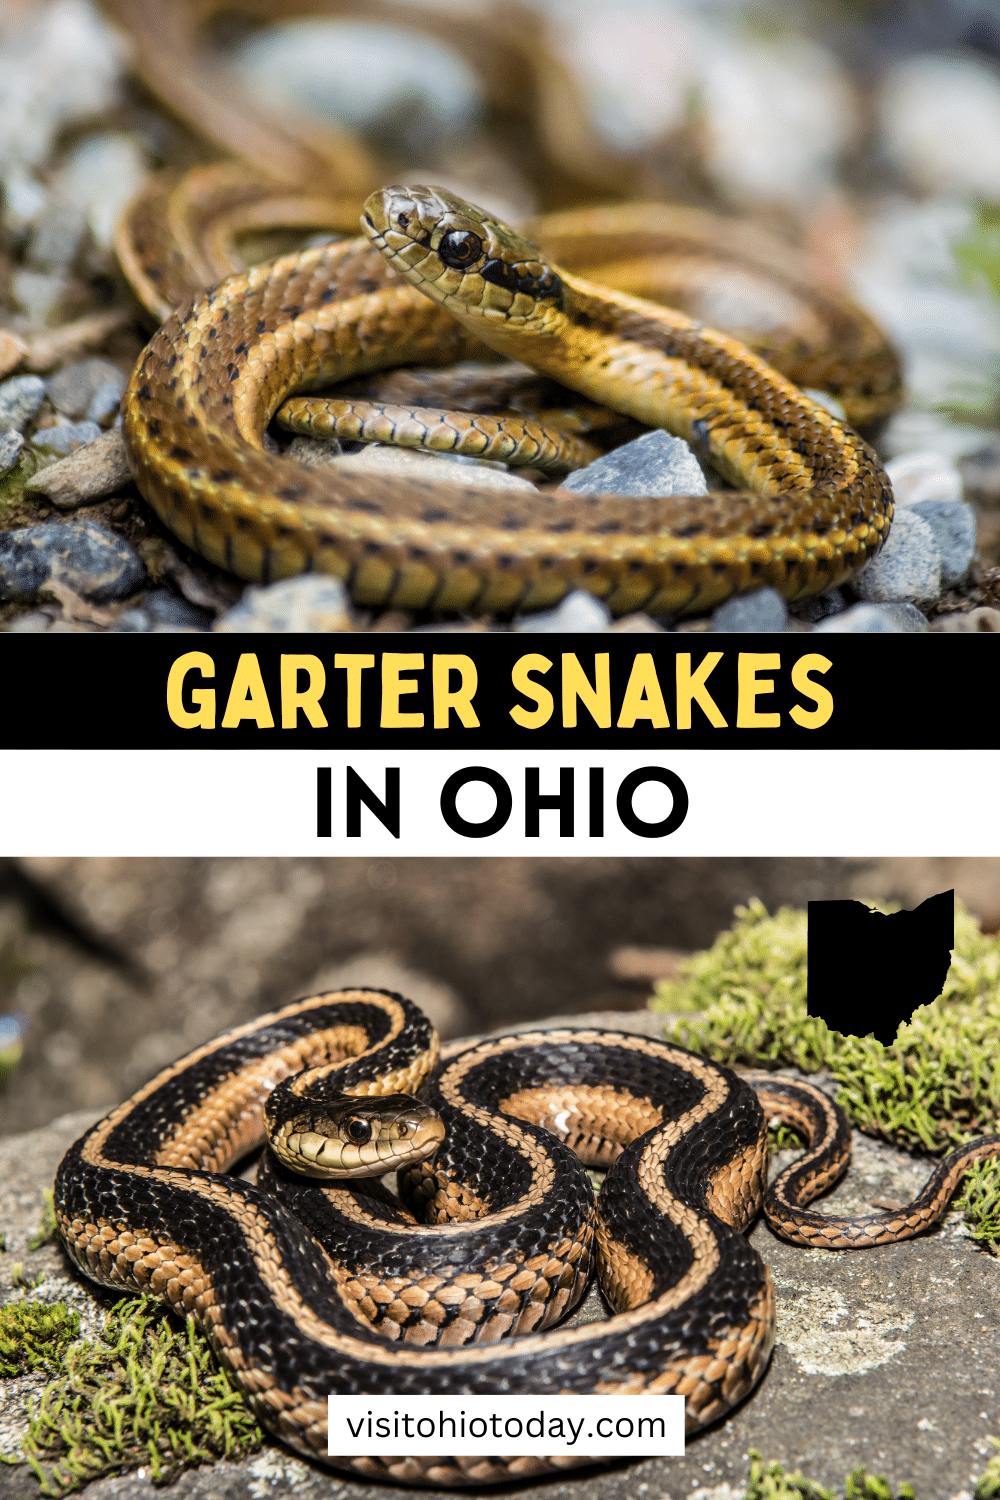 Ohio has some amazing wildlife, and this includes wildlife of the reptilian nature. Garter snakes have been at home in Ohio for centuries, and in this article we feature 5 garter snakes that you may find when you´re out and about.